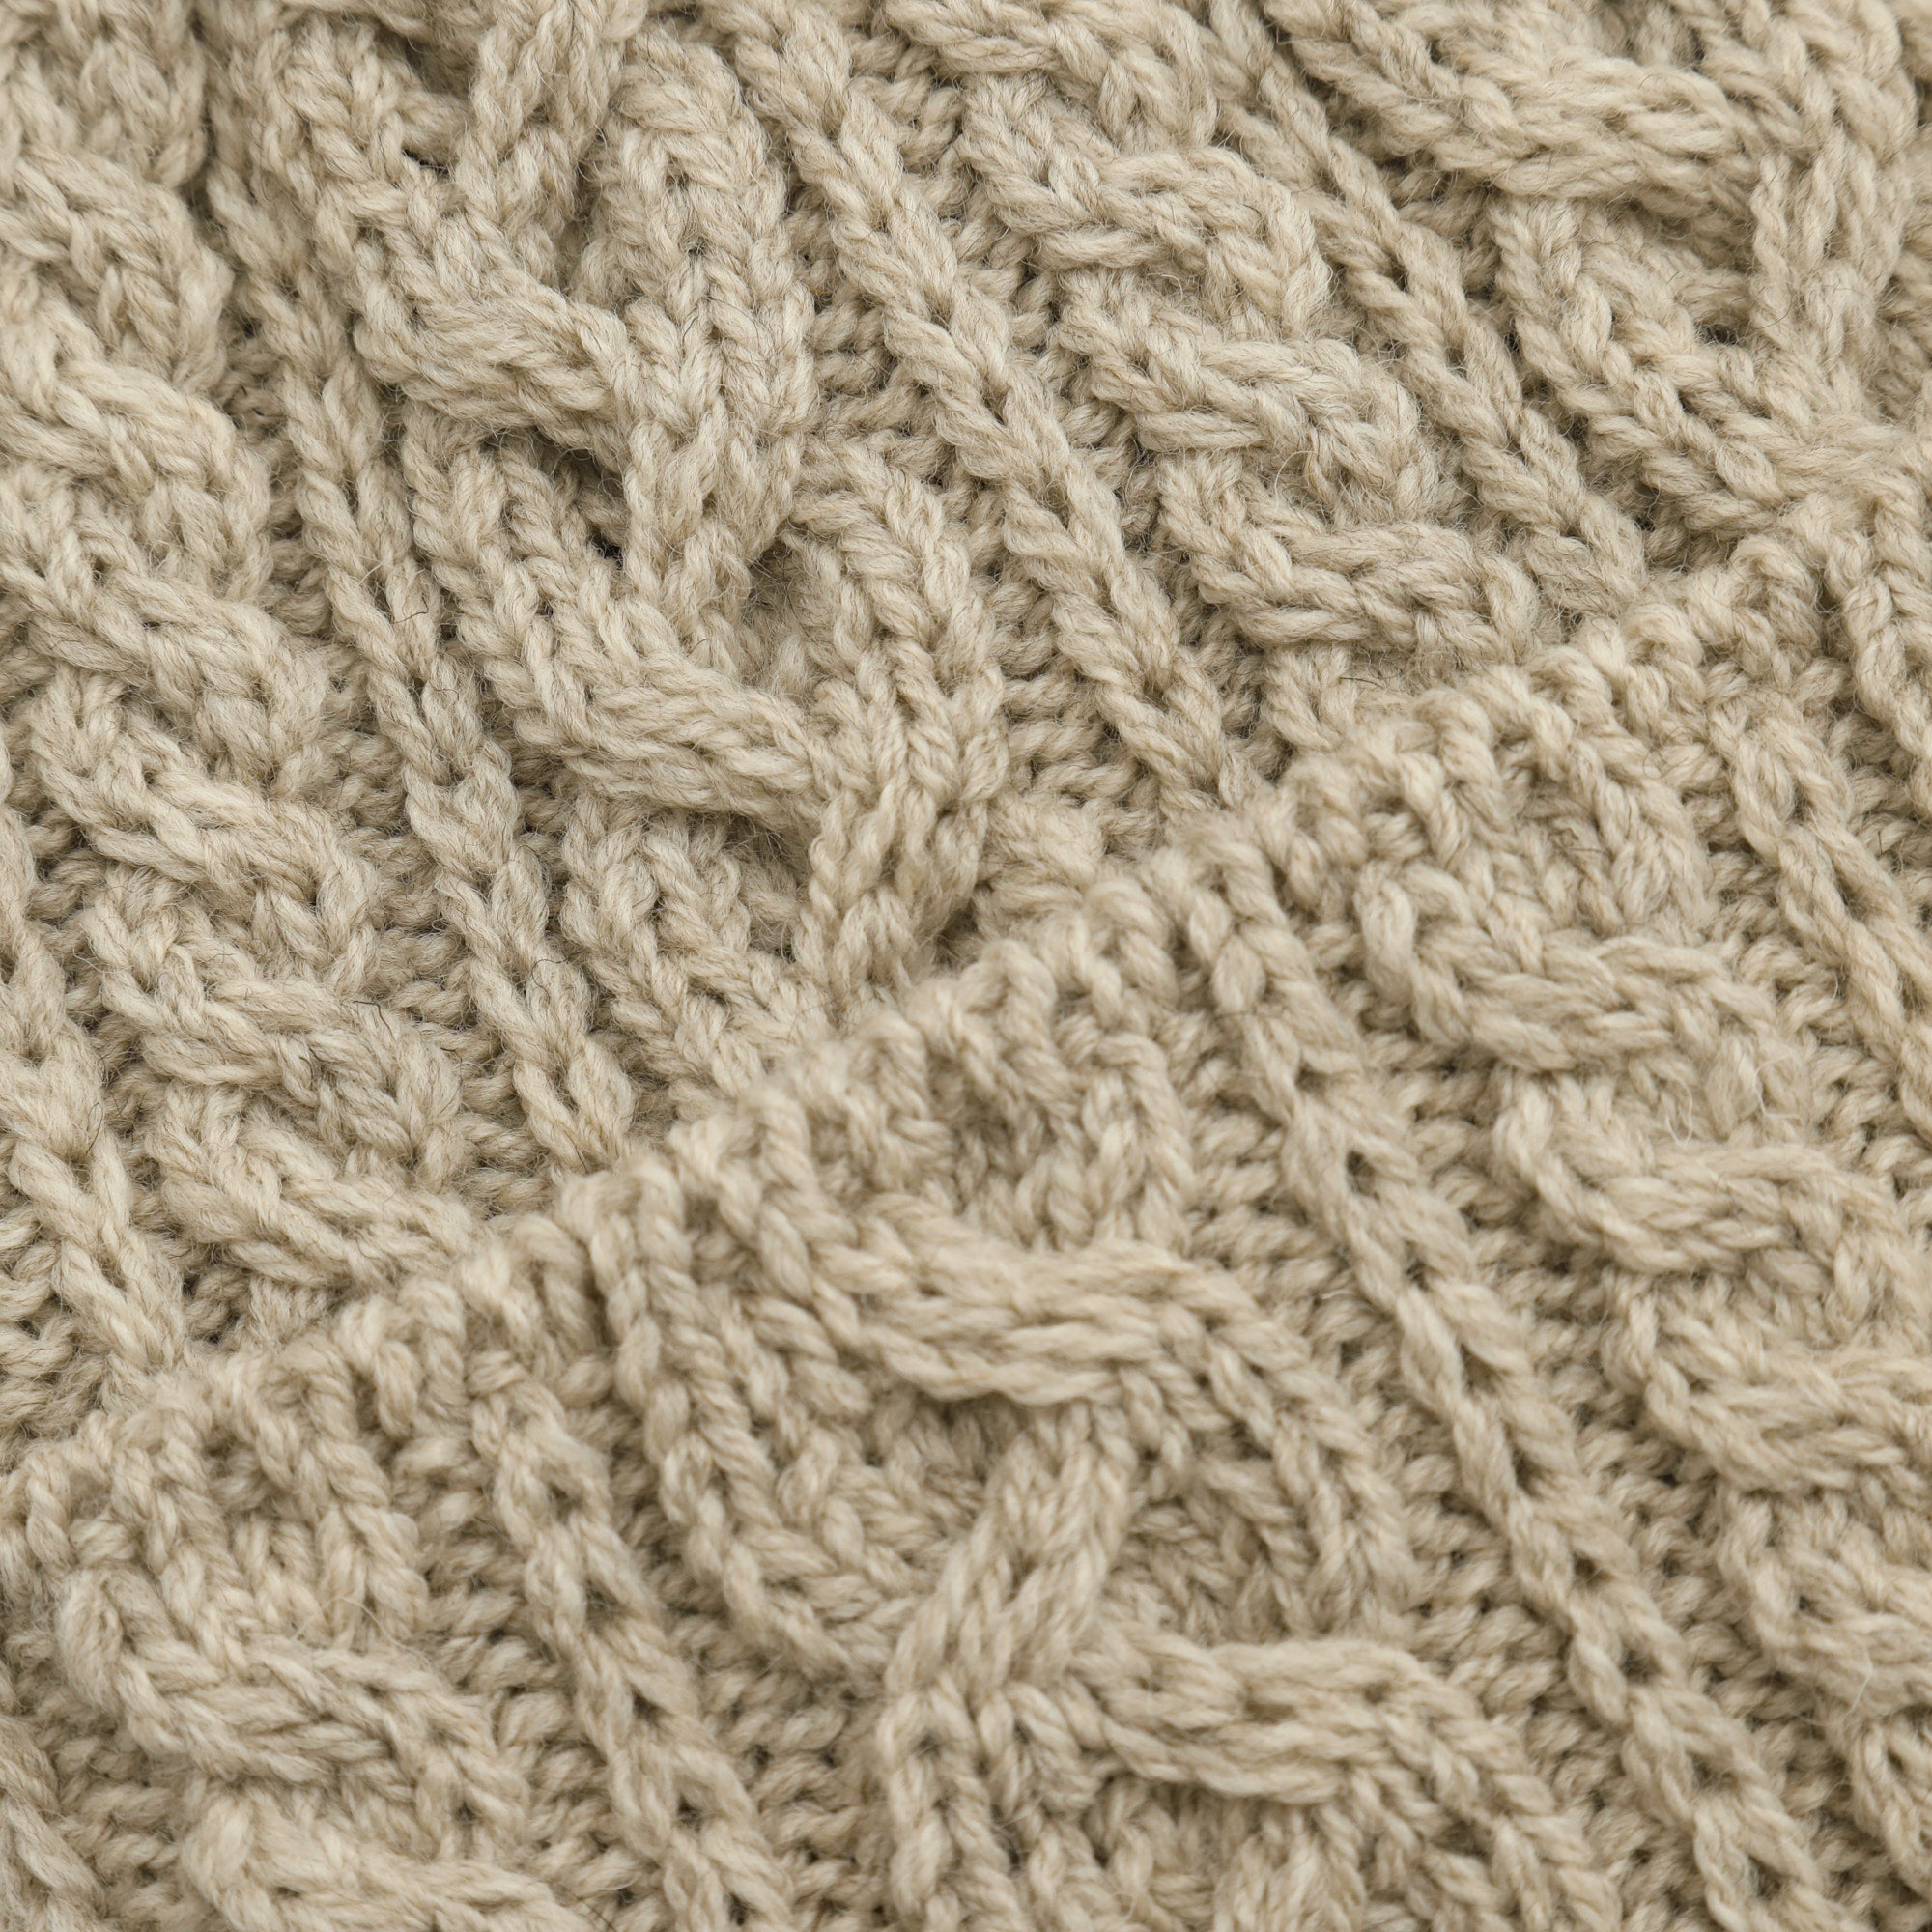 Merino 016 Cable Hat - Mulhacan